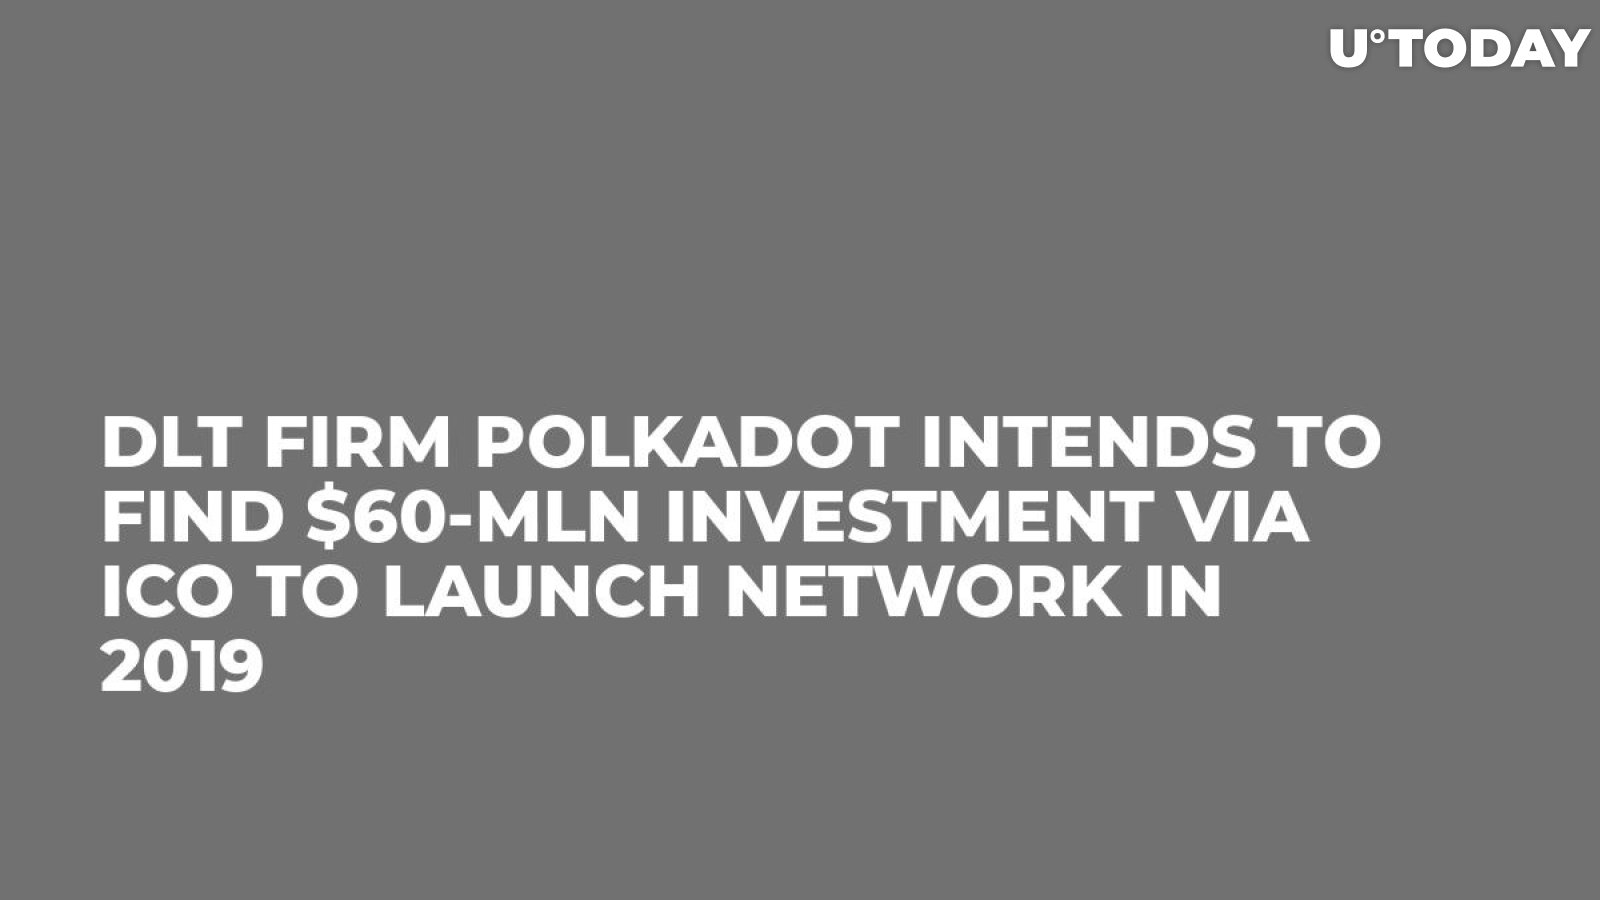 DLT Firm Polkadot Intends to Find $60-Mln Investment via ICO to Launch Network in 2019